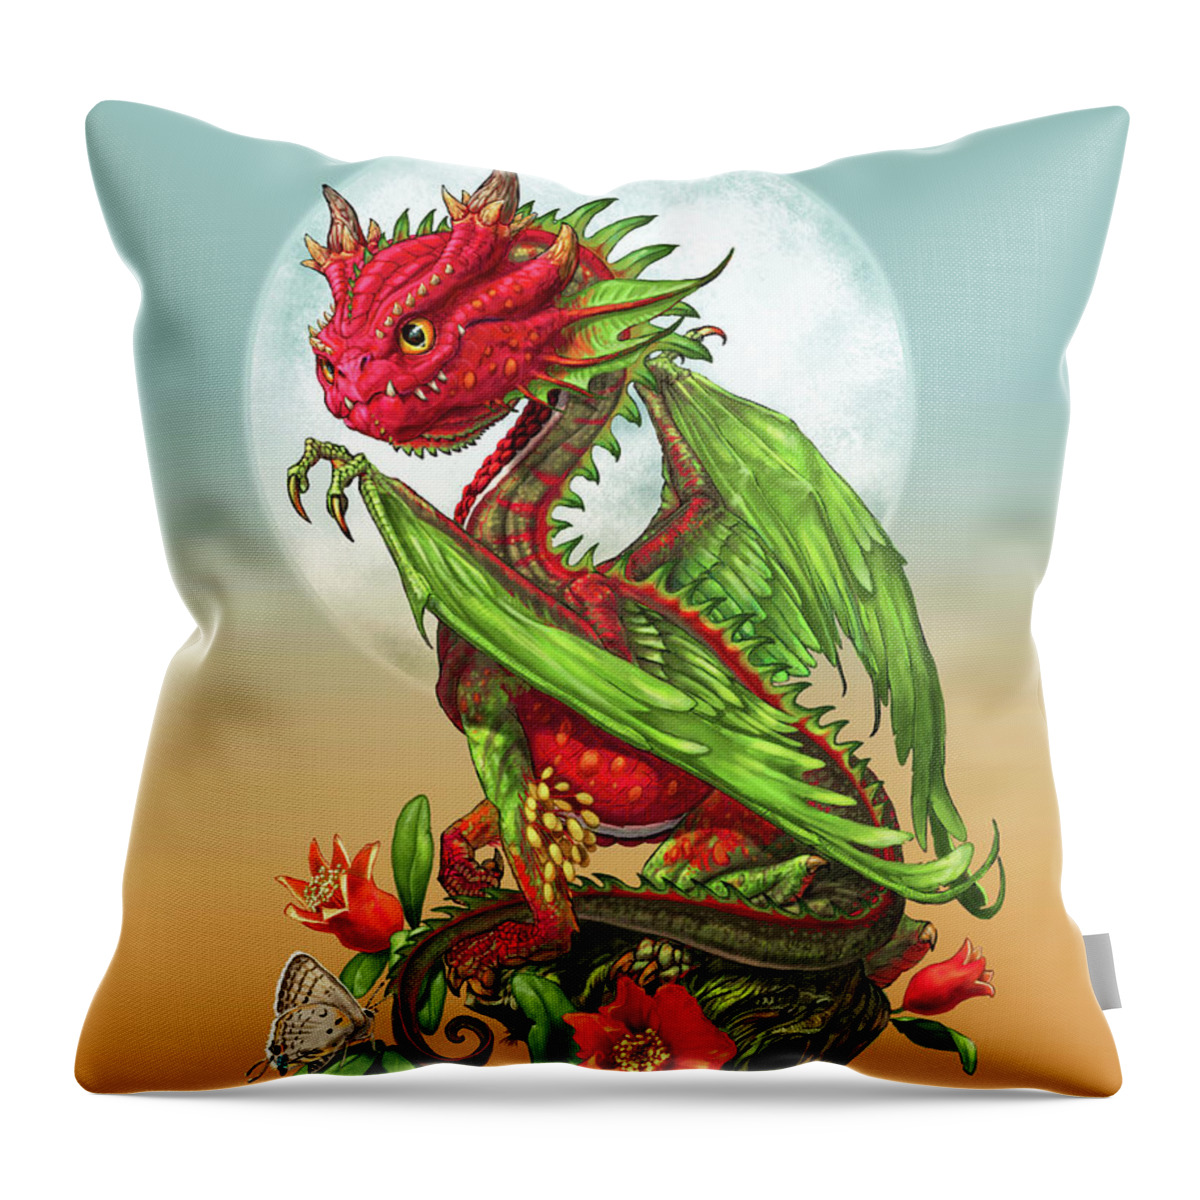 Pomegranate Throw Pillow featuring the digital art Pomegranate Dragon by Stanley Morrison